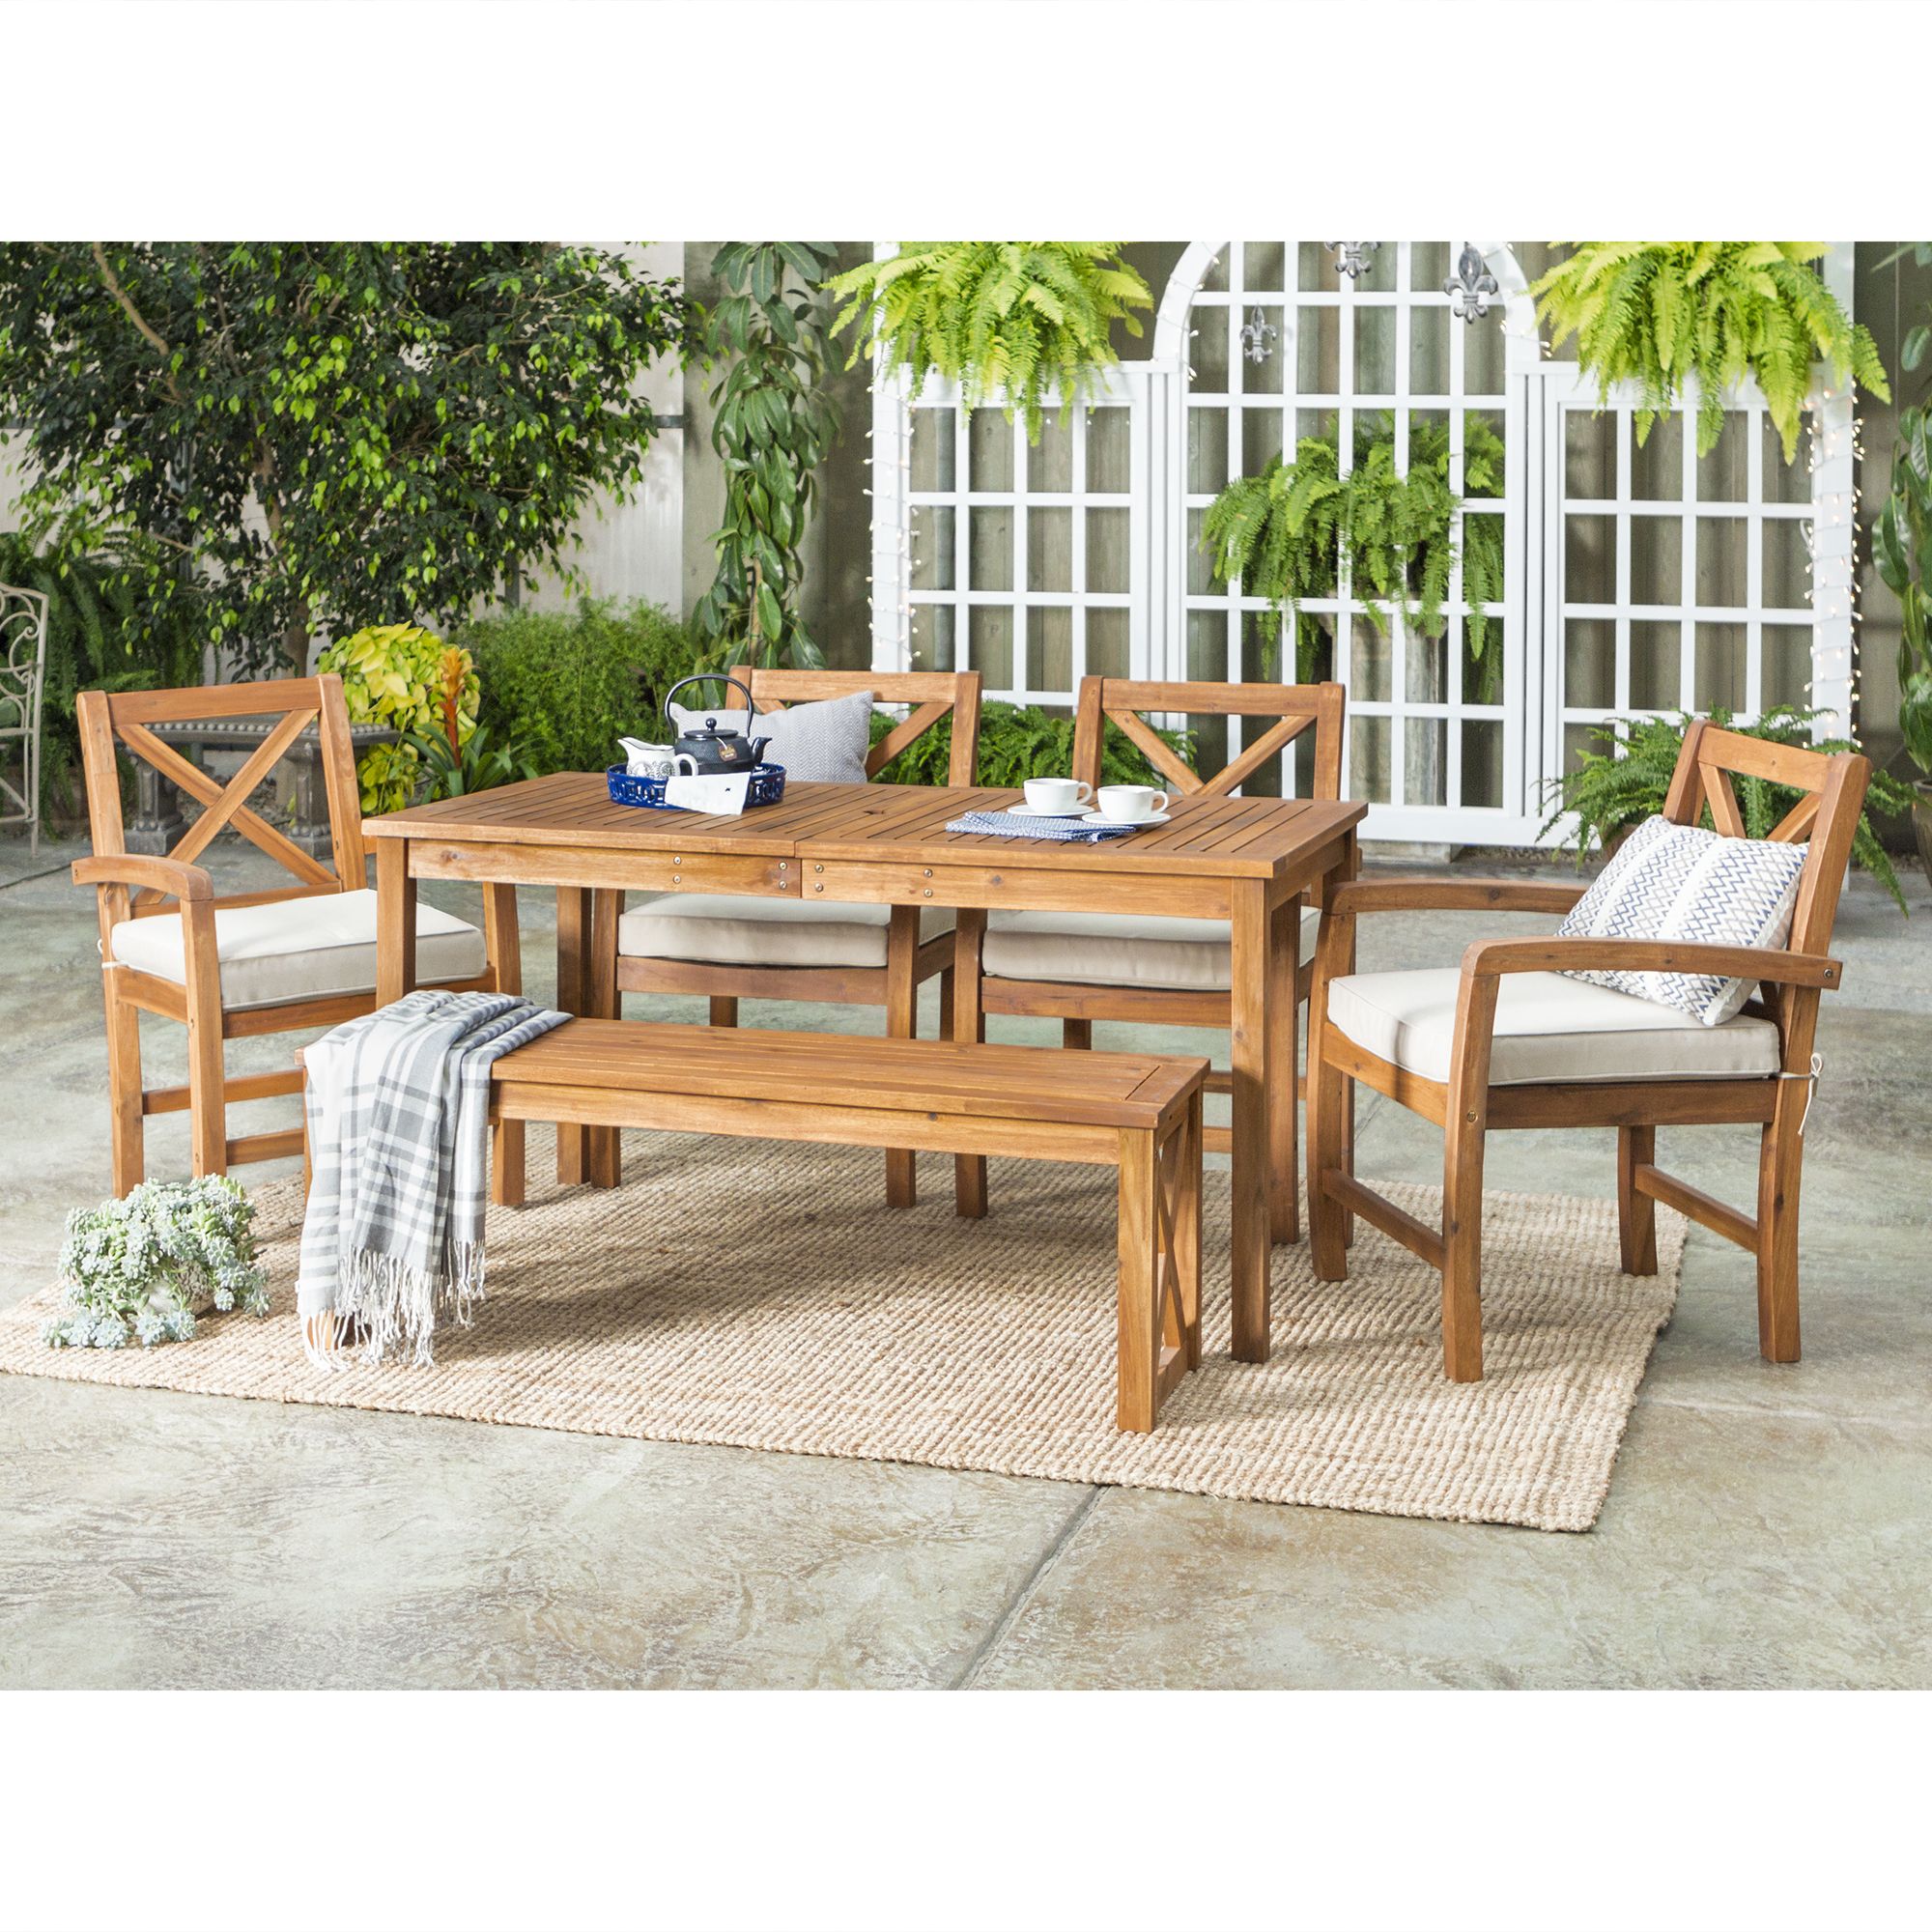 W Trends 6 Pc Acacia Wood Outdoor Dining Set Brown Bjs